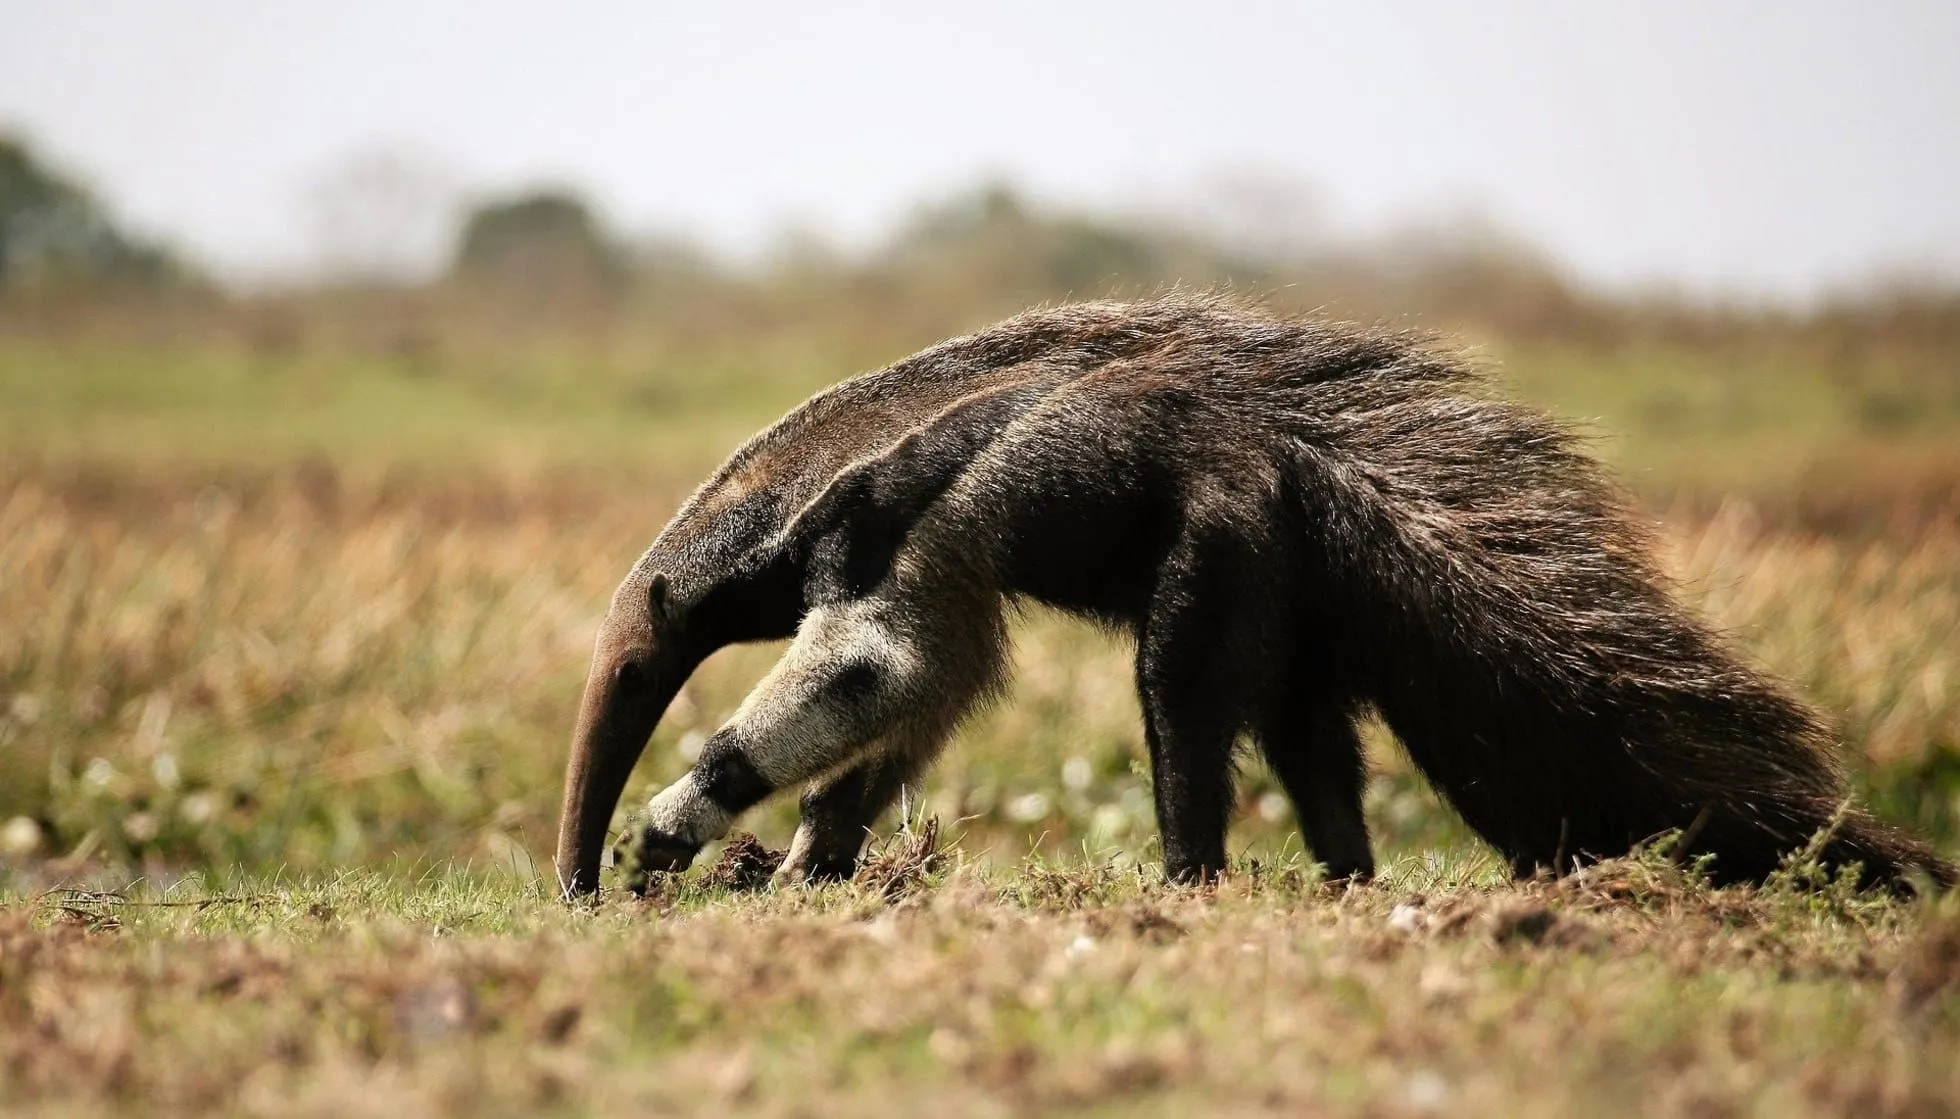 The Anteater